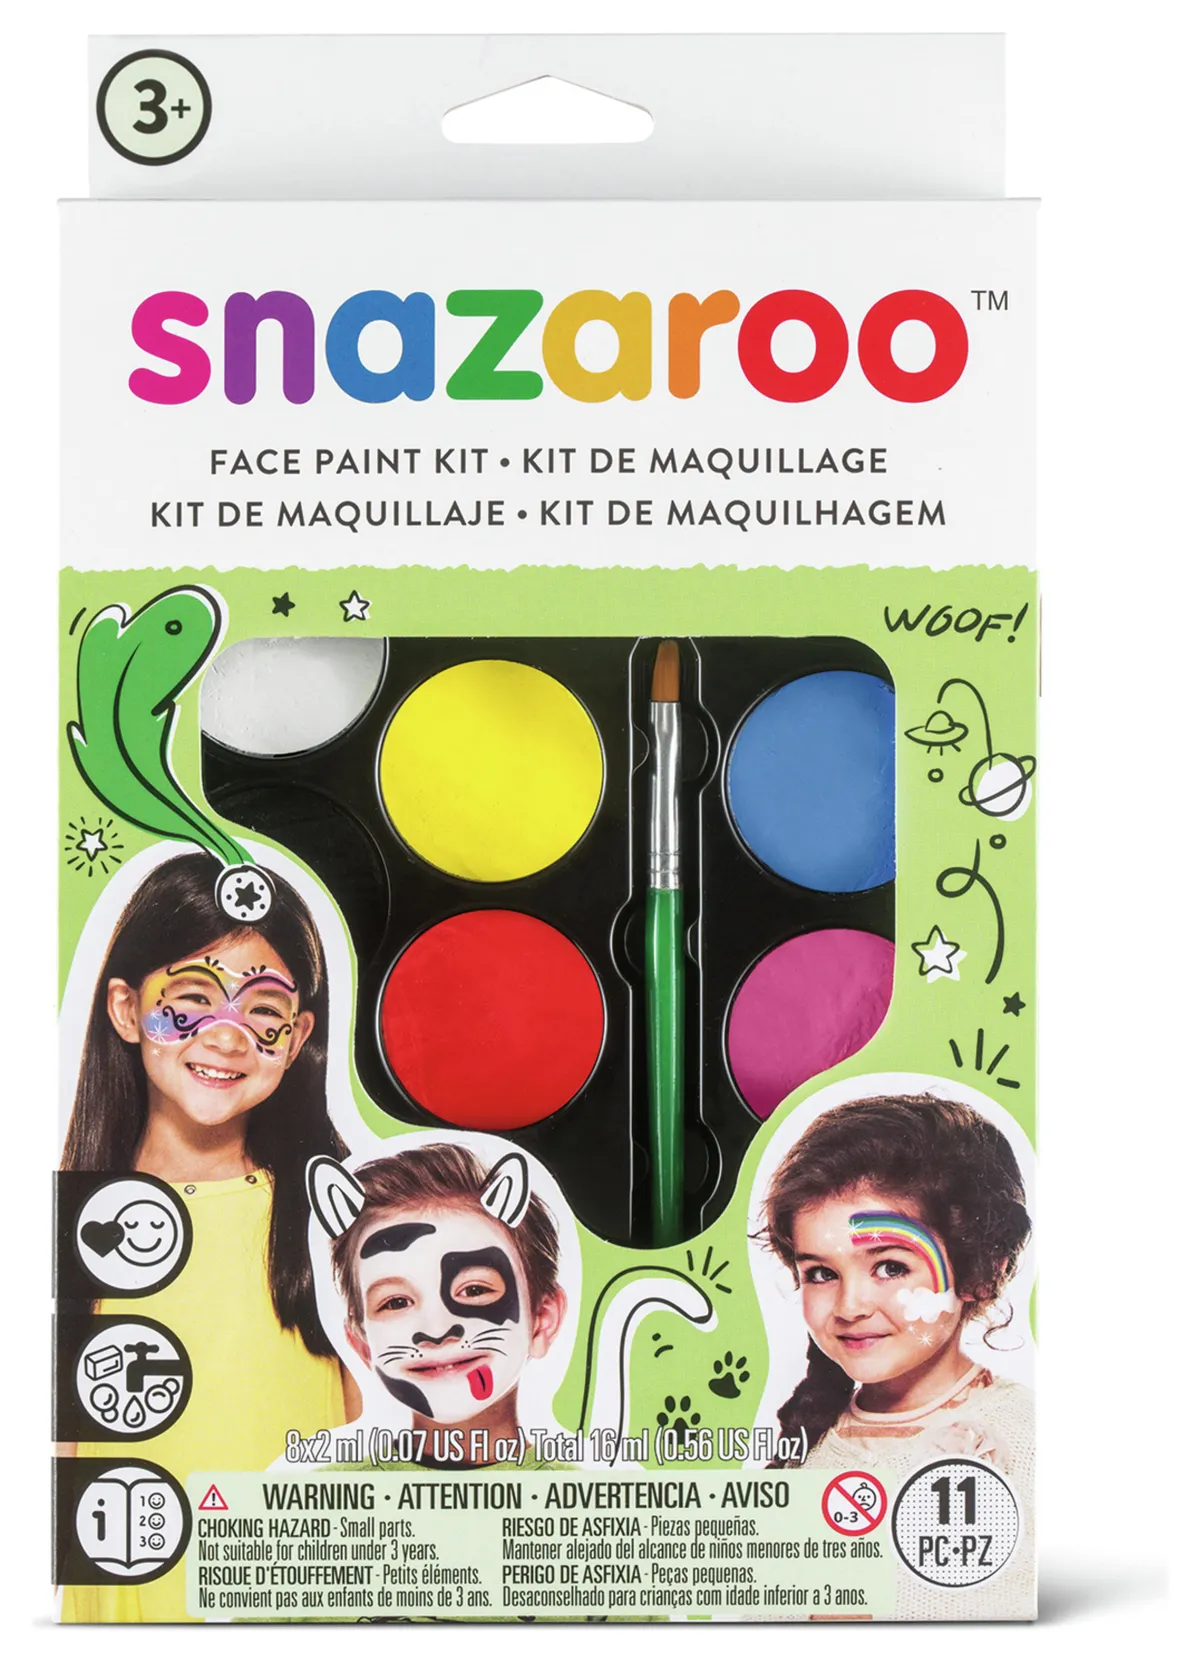 Snazaroo- 10 Easy Kids' Face Paints In Under 10 Minutes » Read Now!